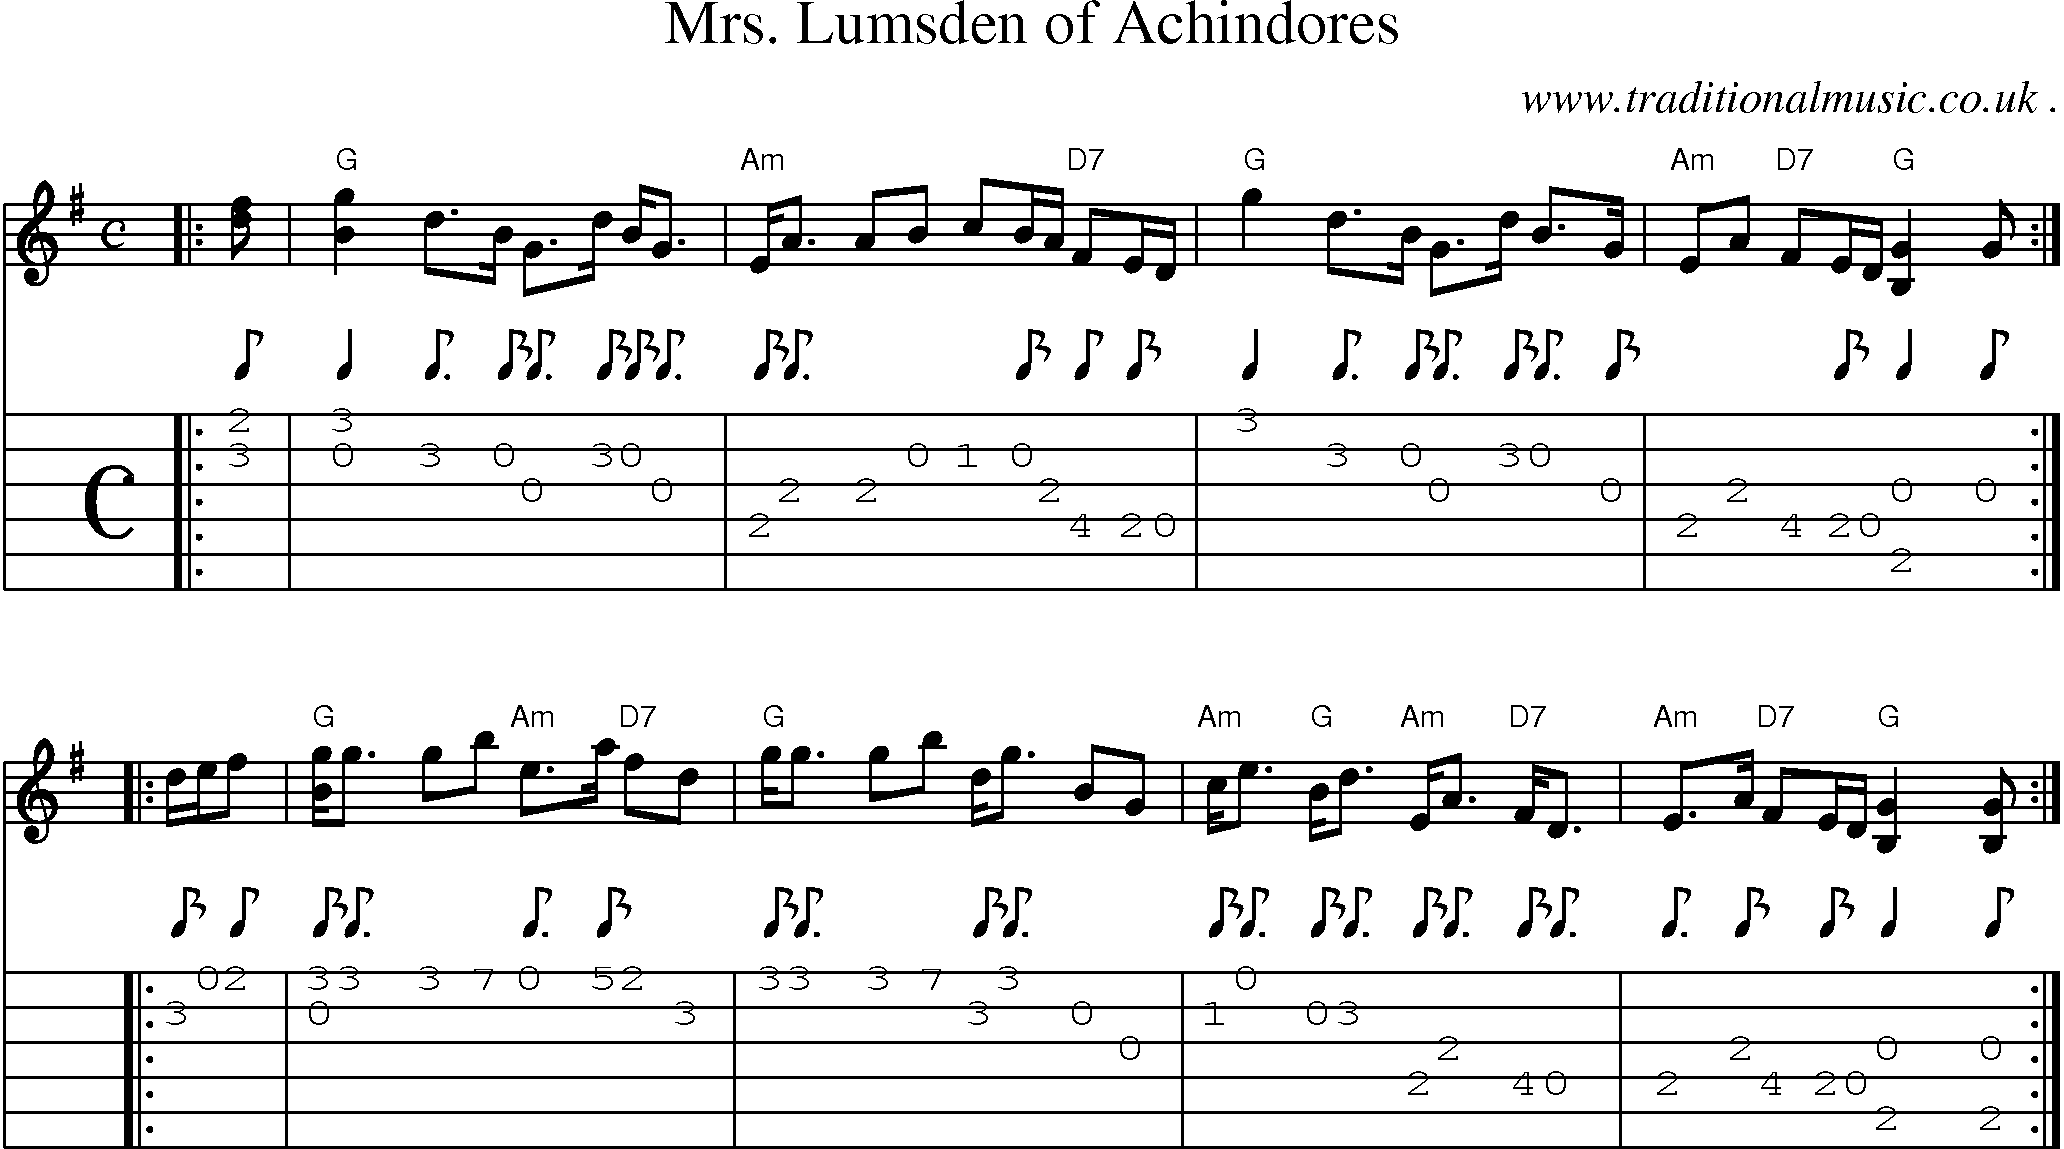 Sheet-music  score, Chords and Guitar Tabs for Mrs Lumsden Of Achindores